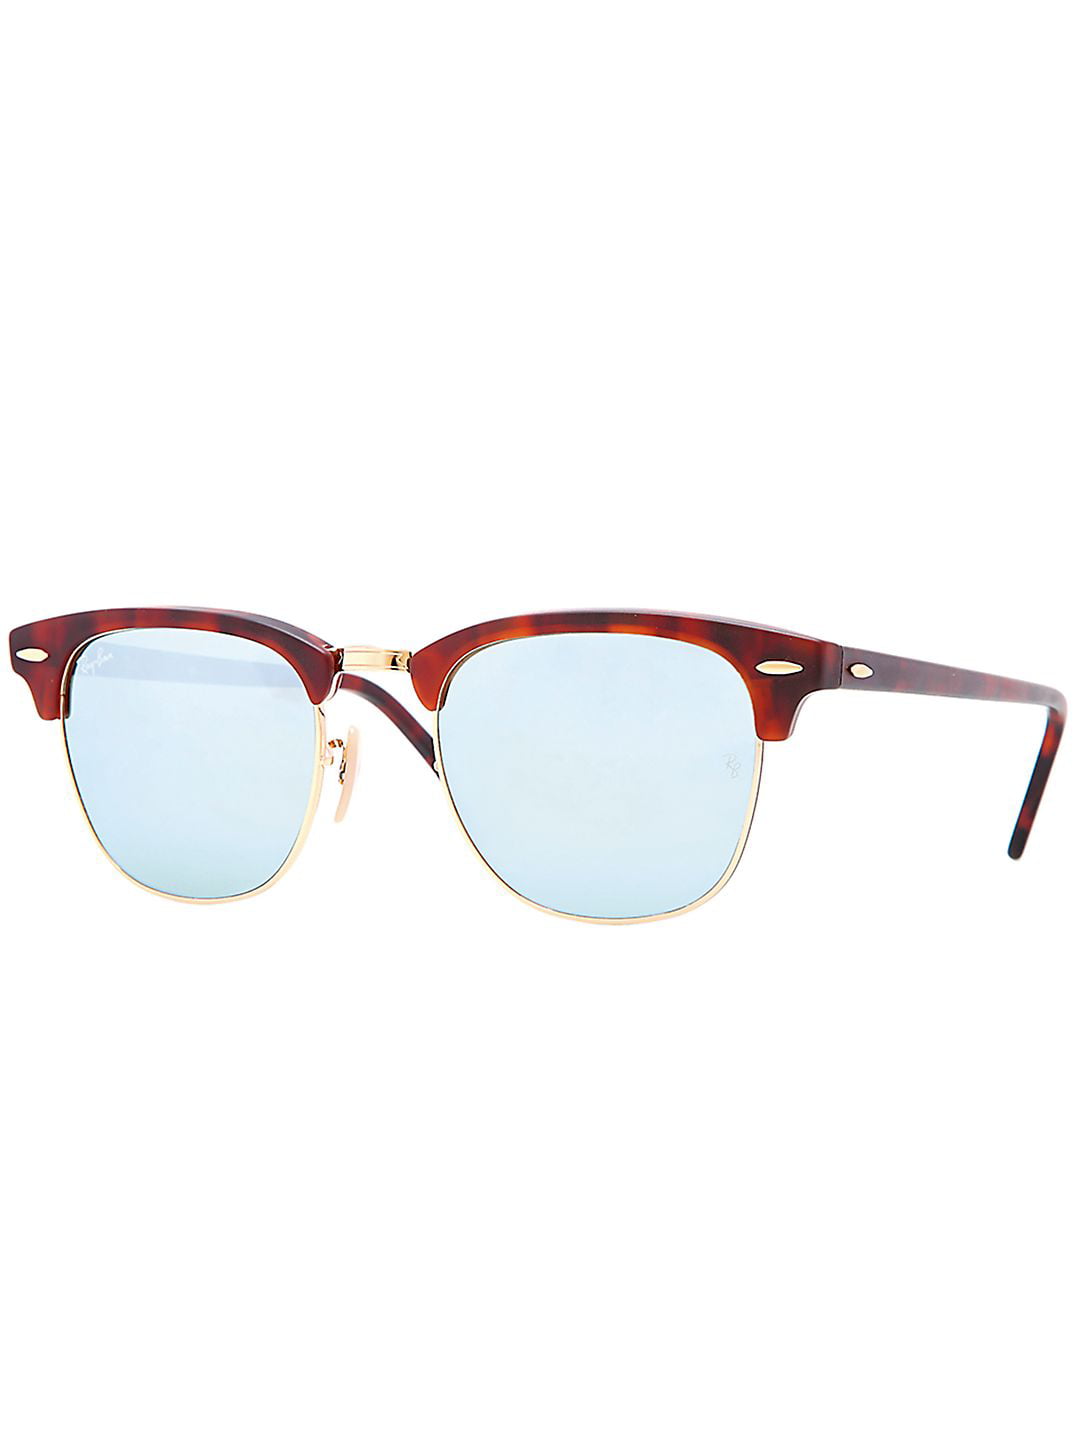 Ray-Ban - Ray-Ban Unisex RB3016 Classic 